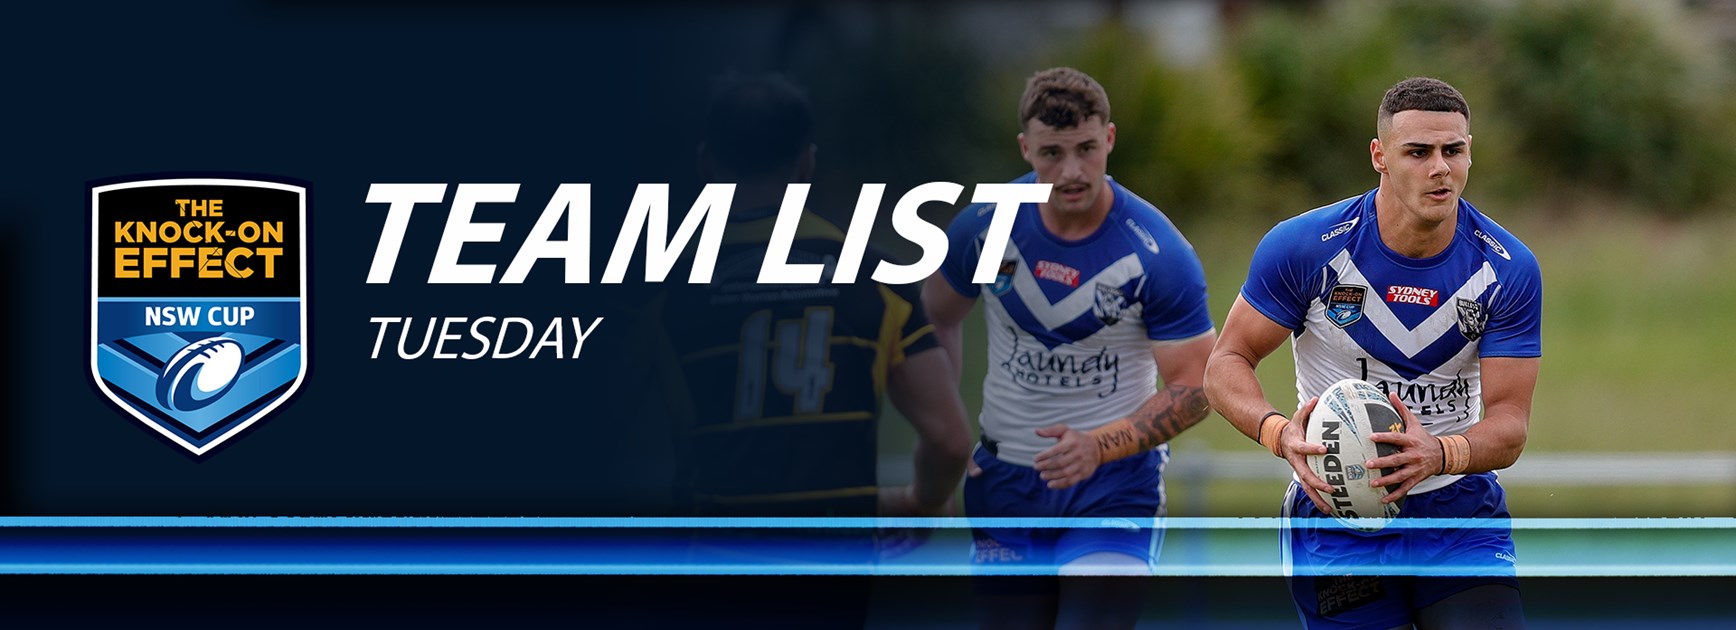 Team List Tuesday | The Knock-On Effect NSW Cup Preliminary Final